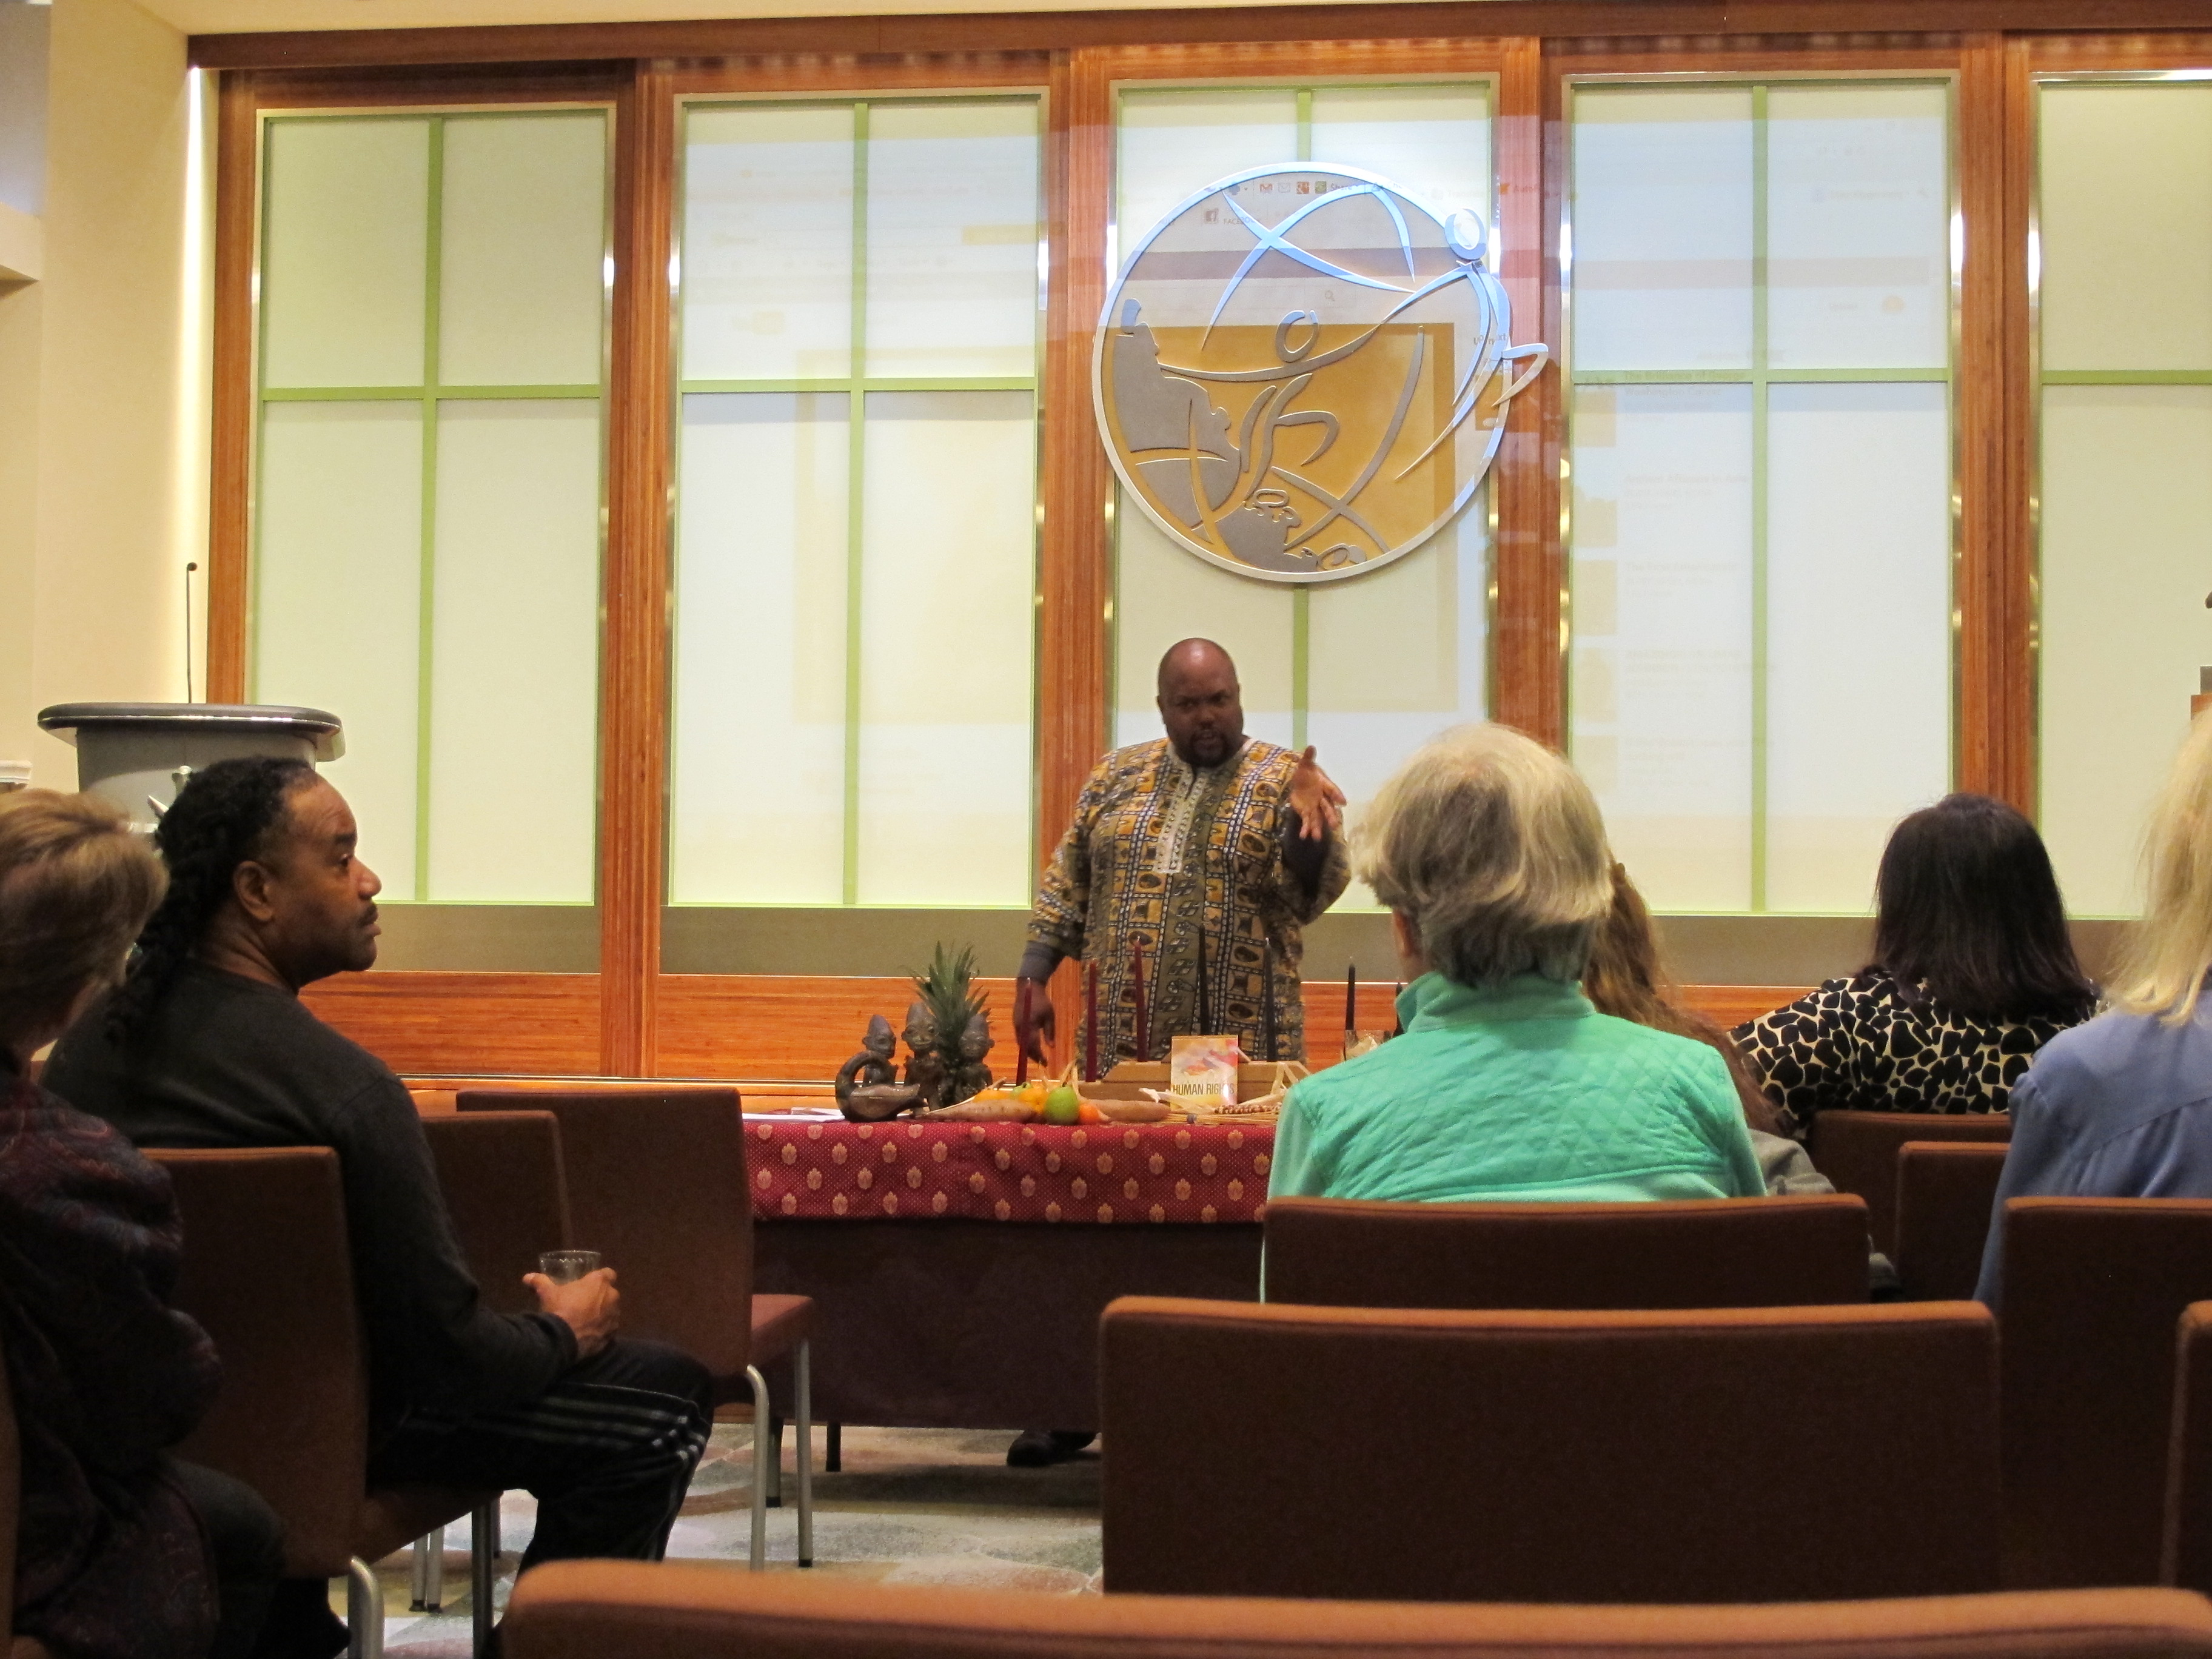 Local Coordinator of the Kwanzaa Michael Harris taught background information to the attendees.